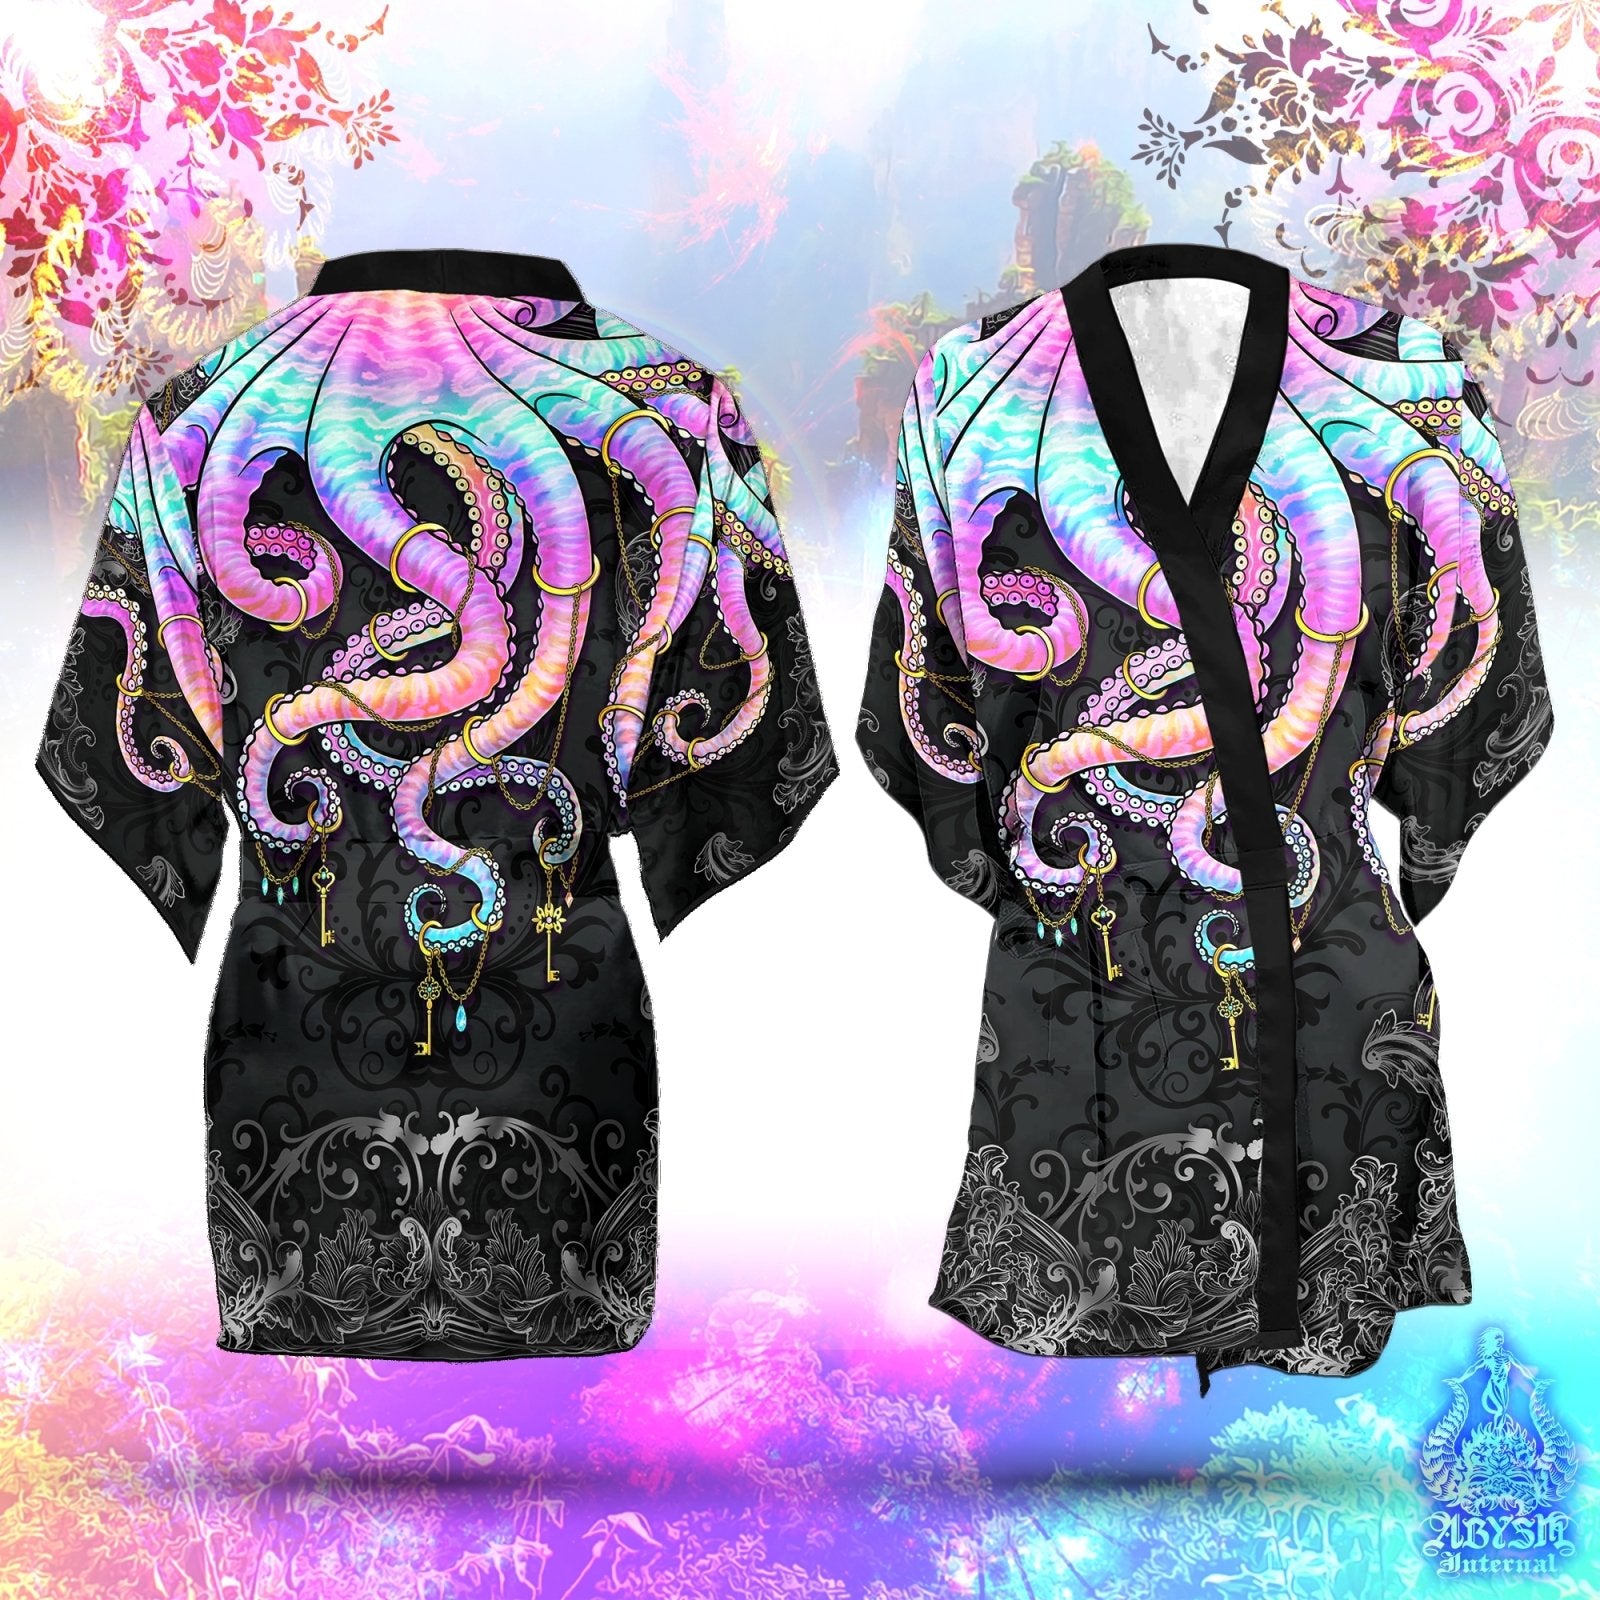 https://cdn.shopify.com/s/files/1/0584/5608/0574/products/beach-cover-up-beach-rave-outfit-octopus-party-kimono-summer-festival-robe-indie-and-alternative-clothing-unisex-pastel-punk-darkabysm-internal-703949.jpg?v=1686686109